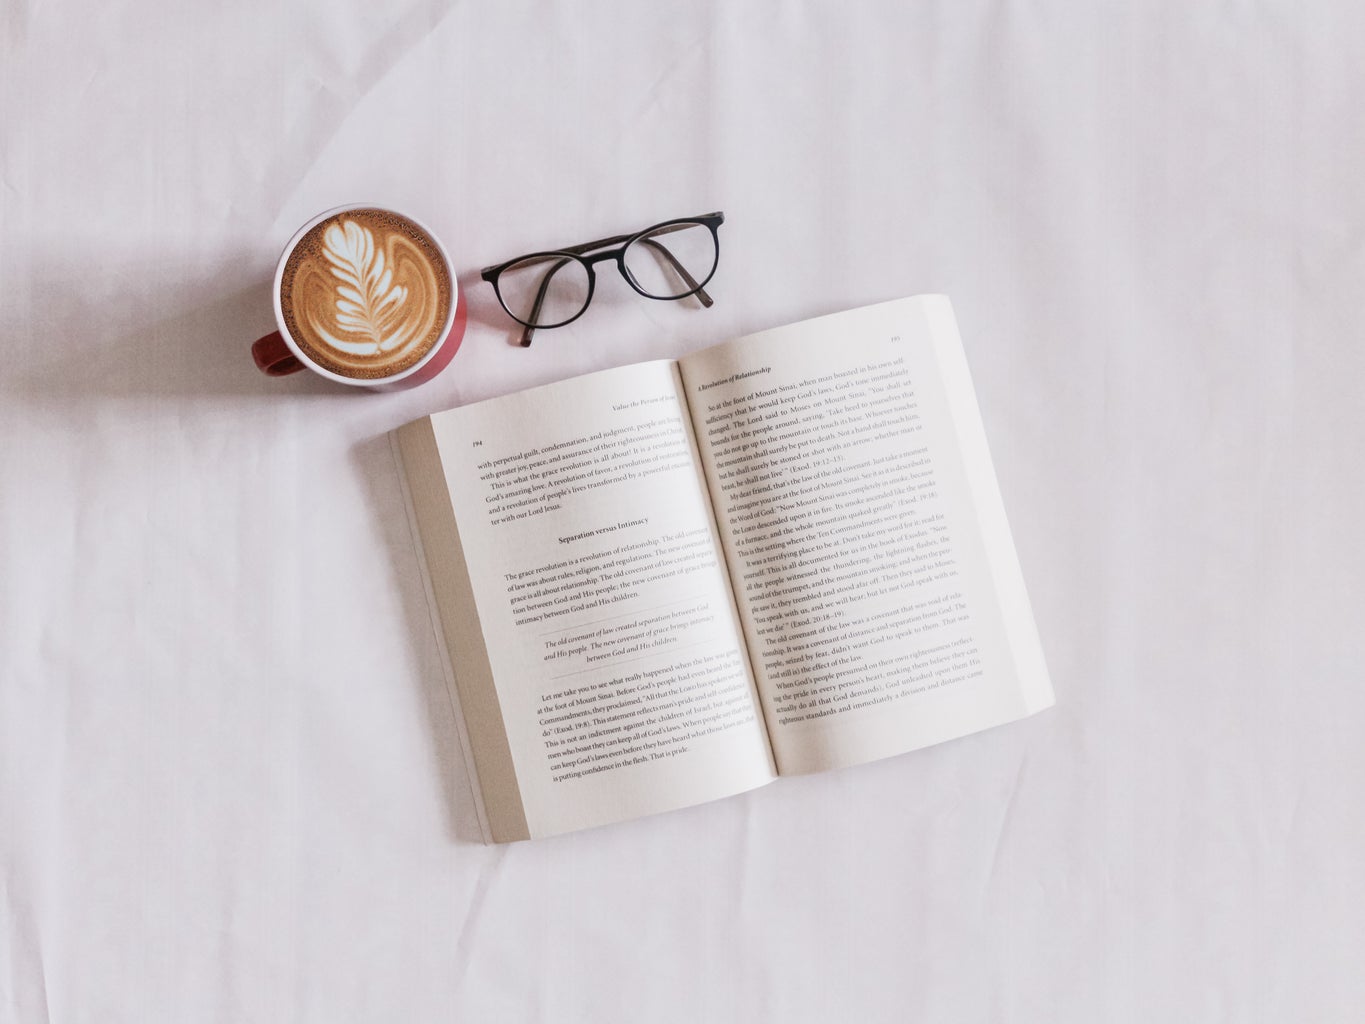 Picture of book next to glasses and cup